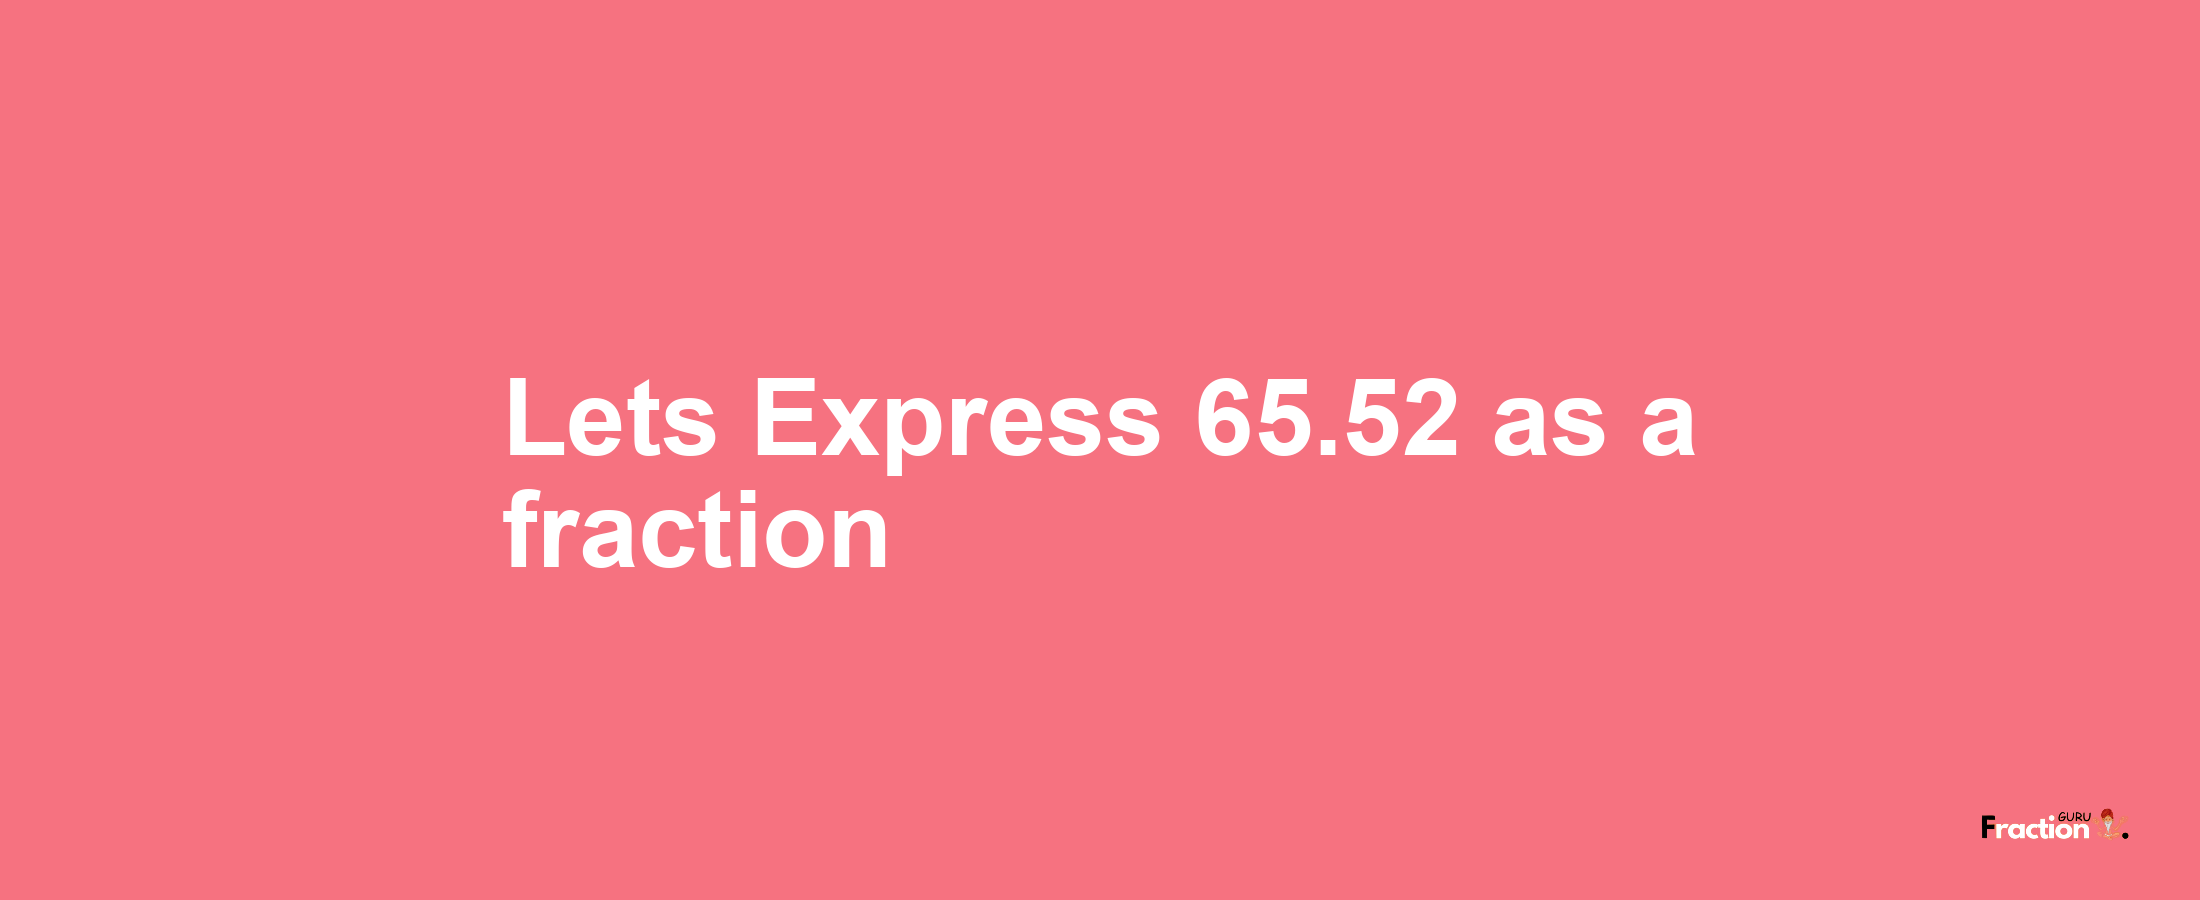 Lets Express 65.52 as afraction